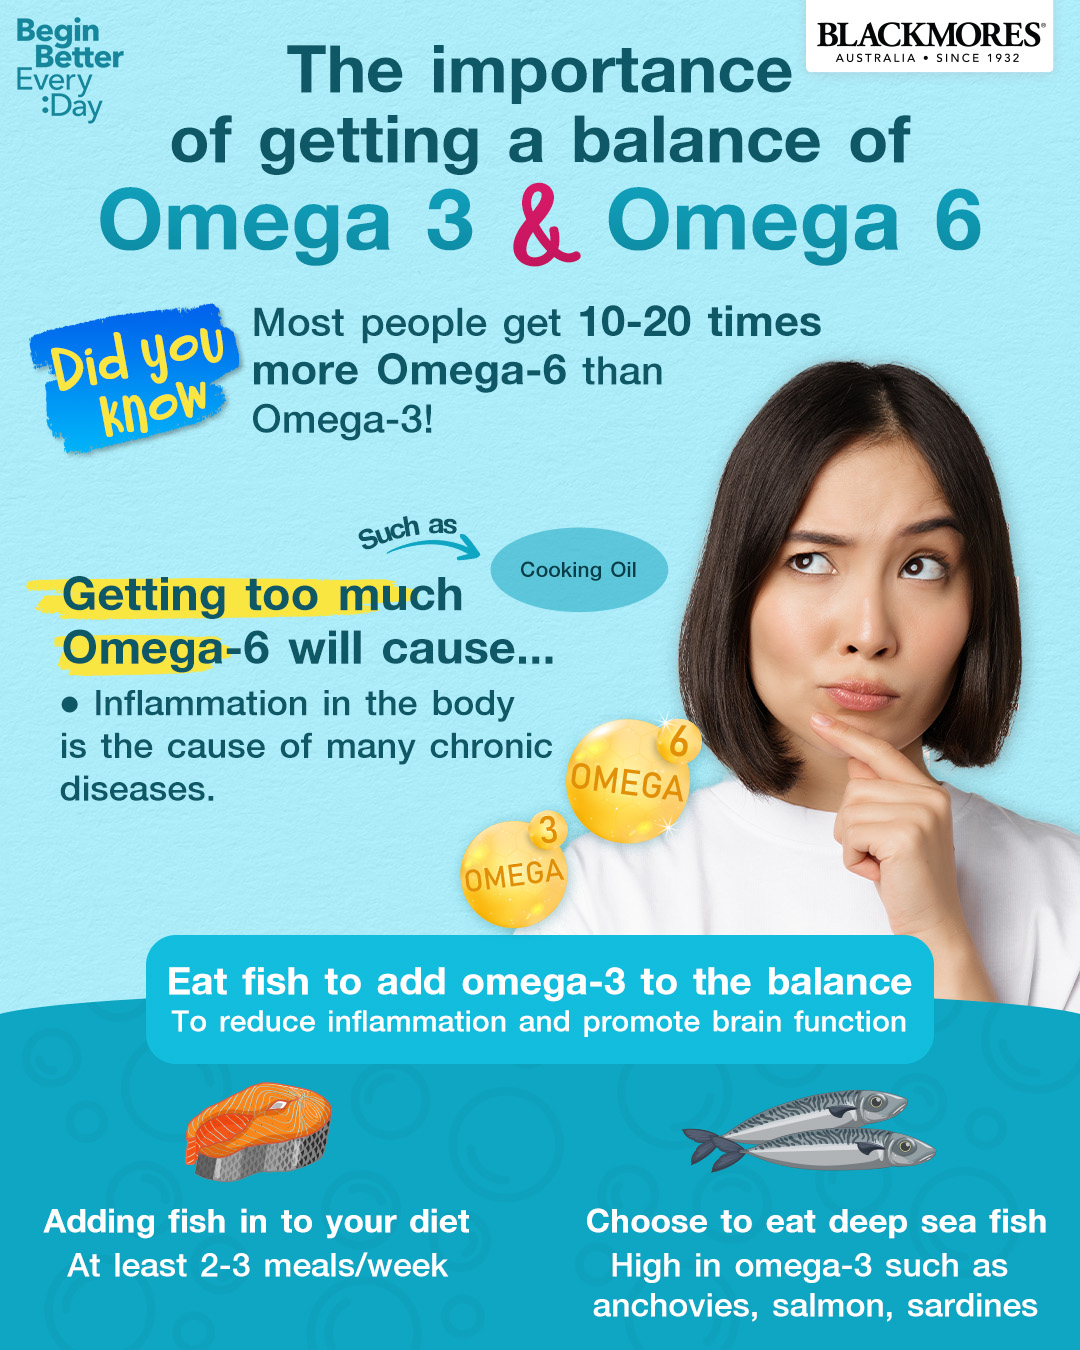 Omega-3 foods and what they are good for